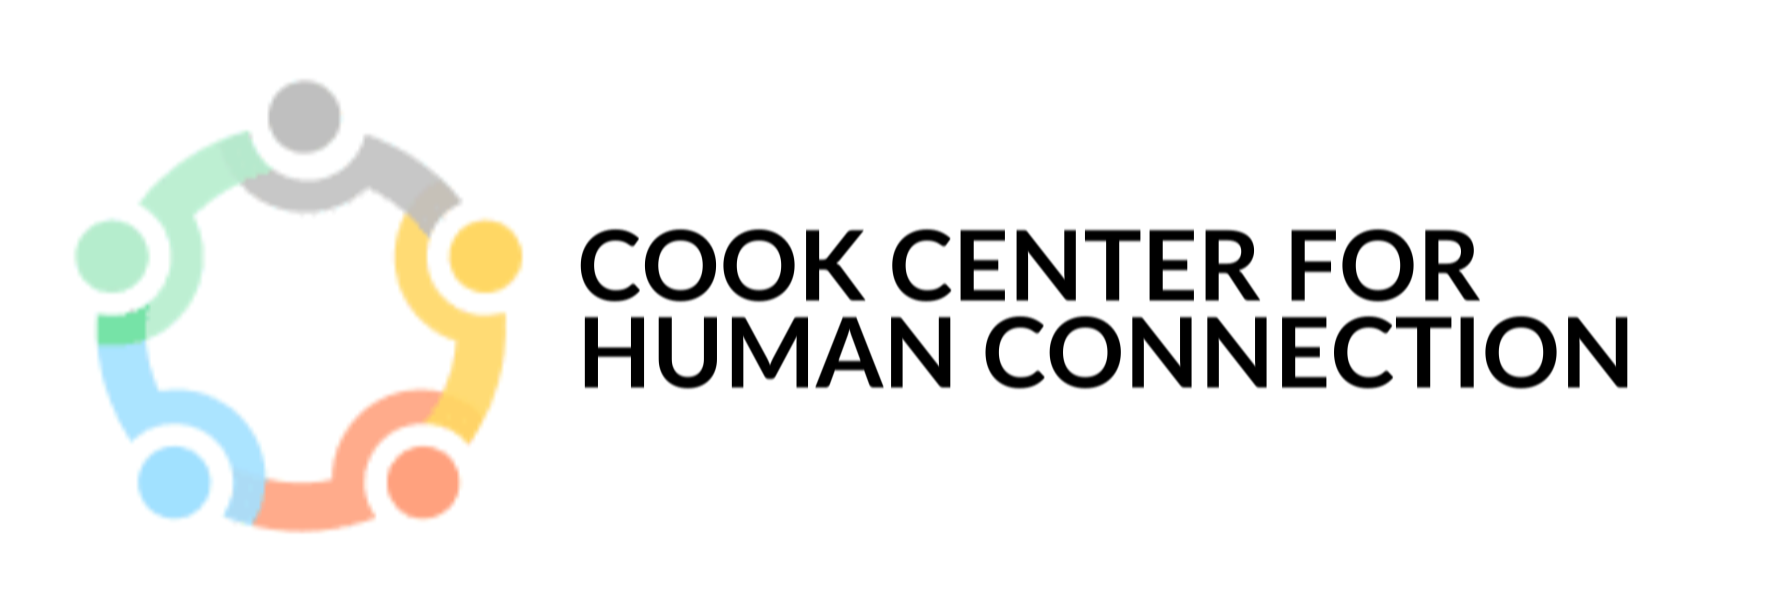 The logo for the Cook Center for Human Connection